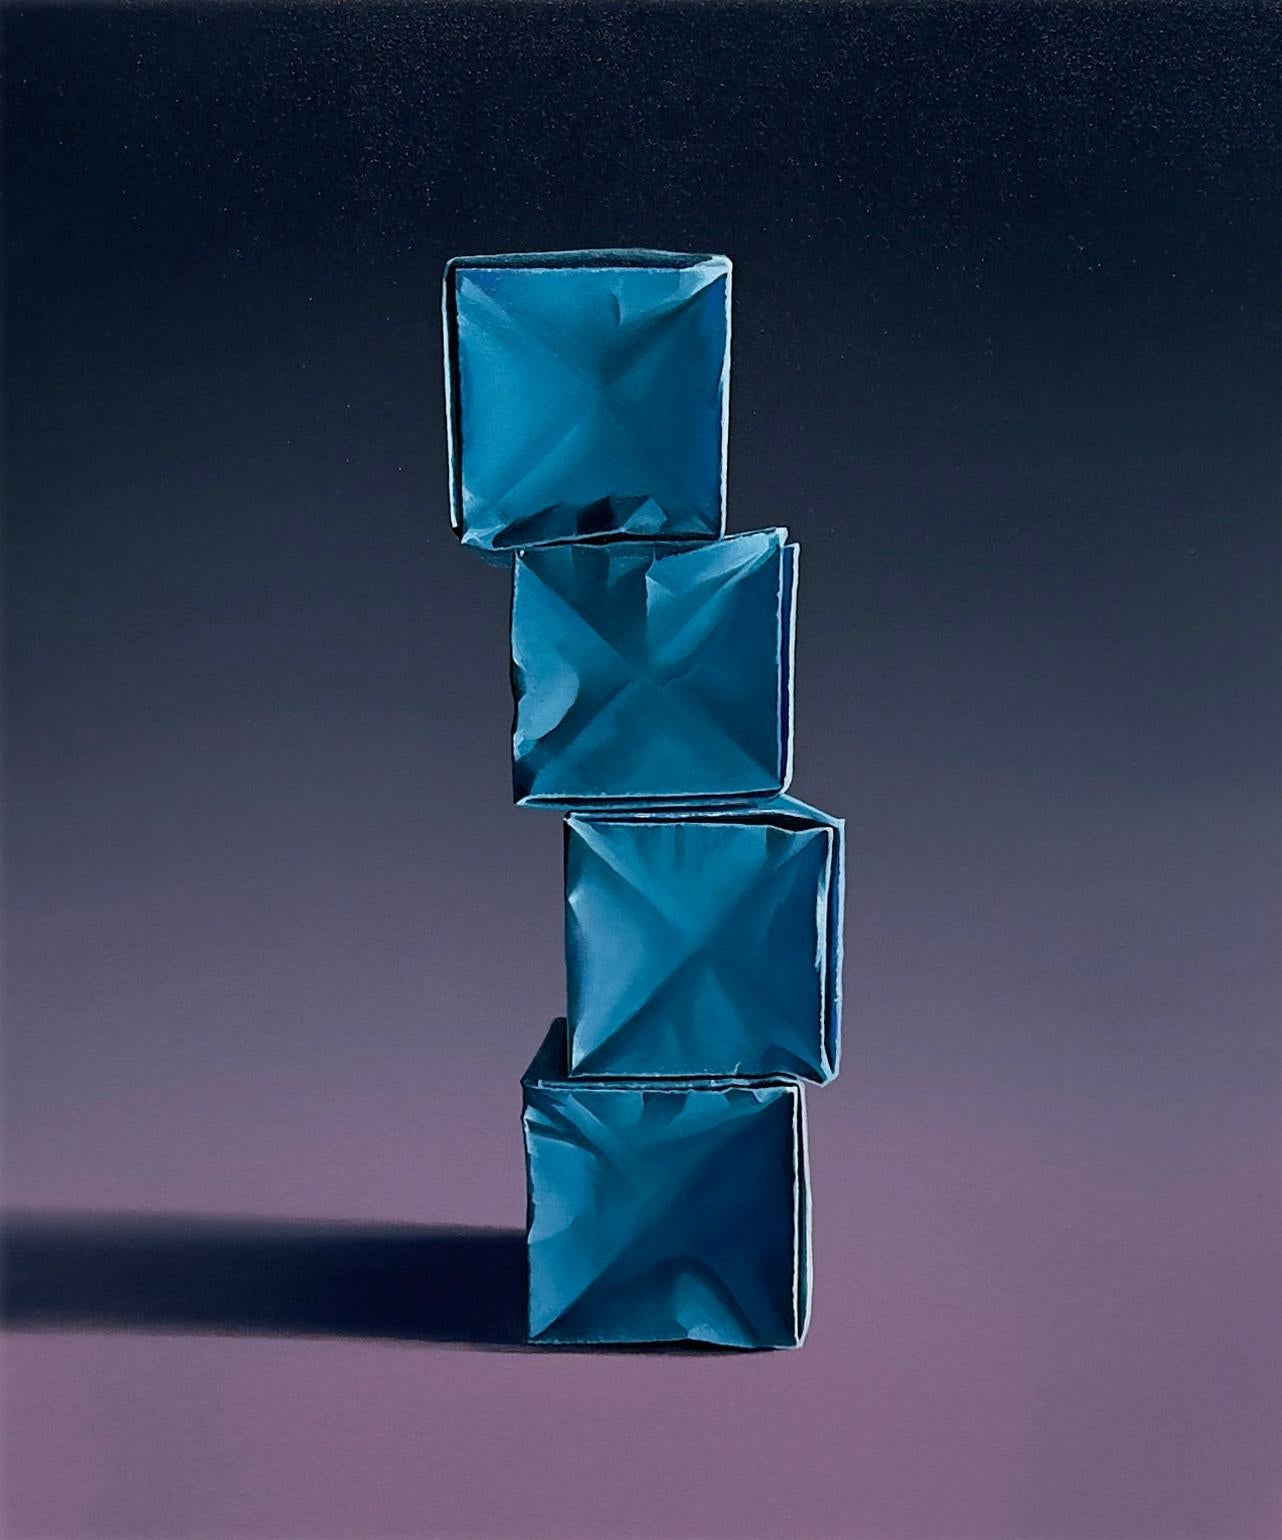 Kevin Palme  Still-Life Painting - PAPER BOXES: COMPOSITION WITH A TEAL STACK ON PURPLE/GRAY GRADIENT